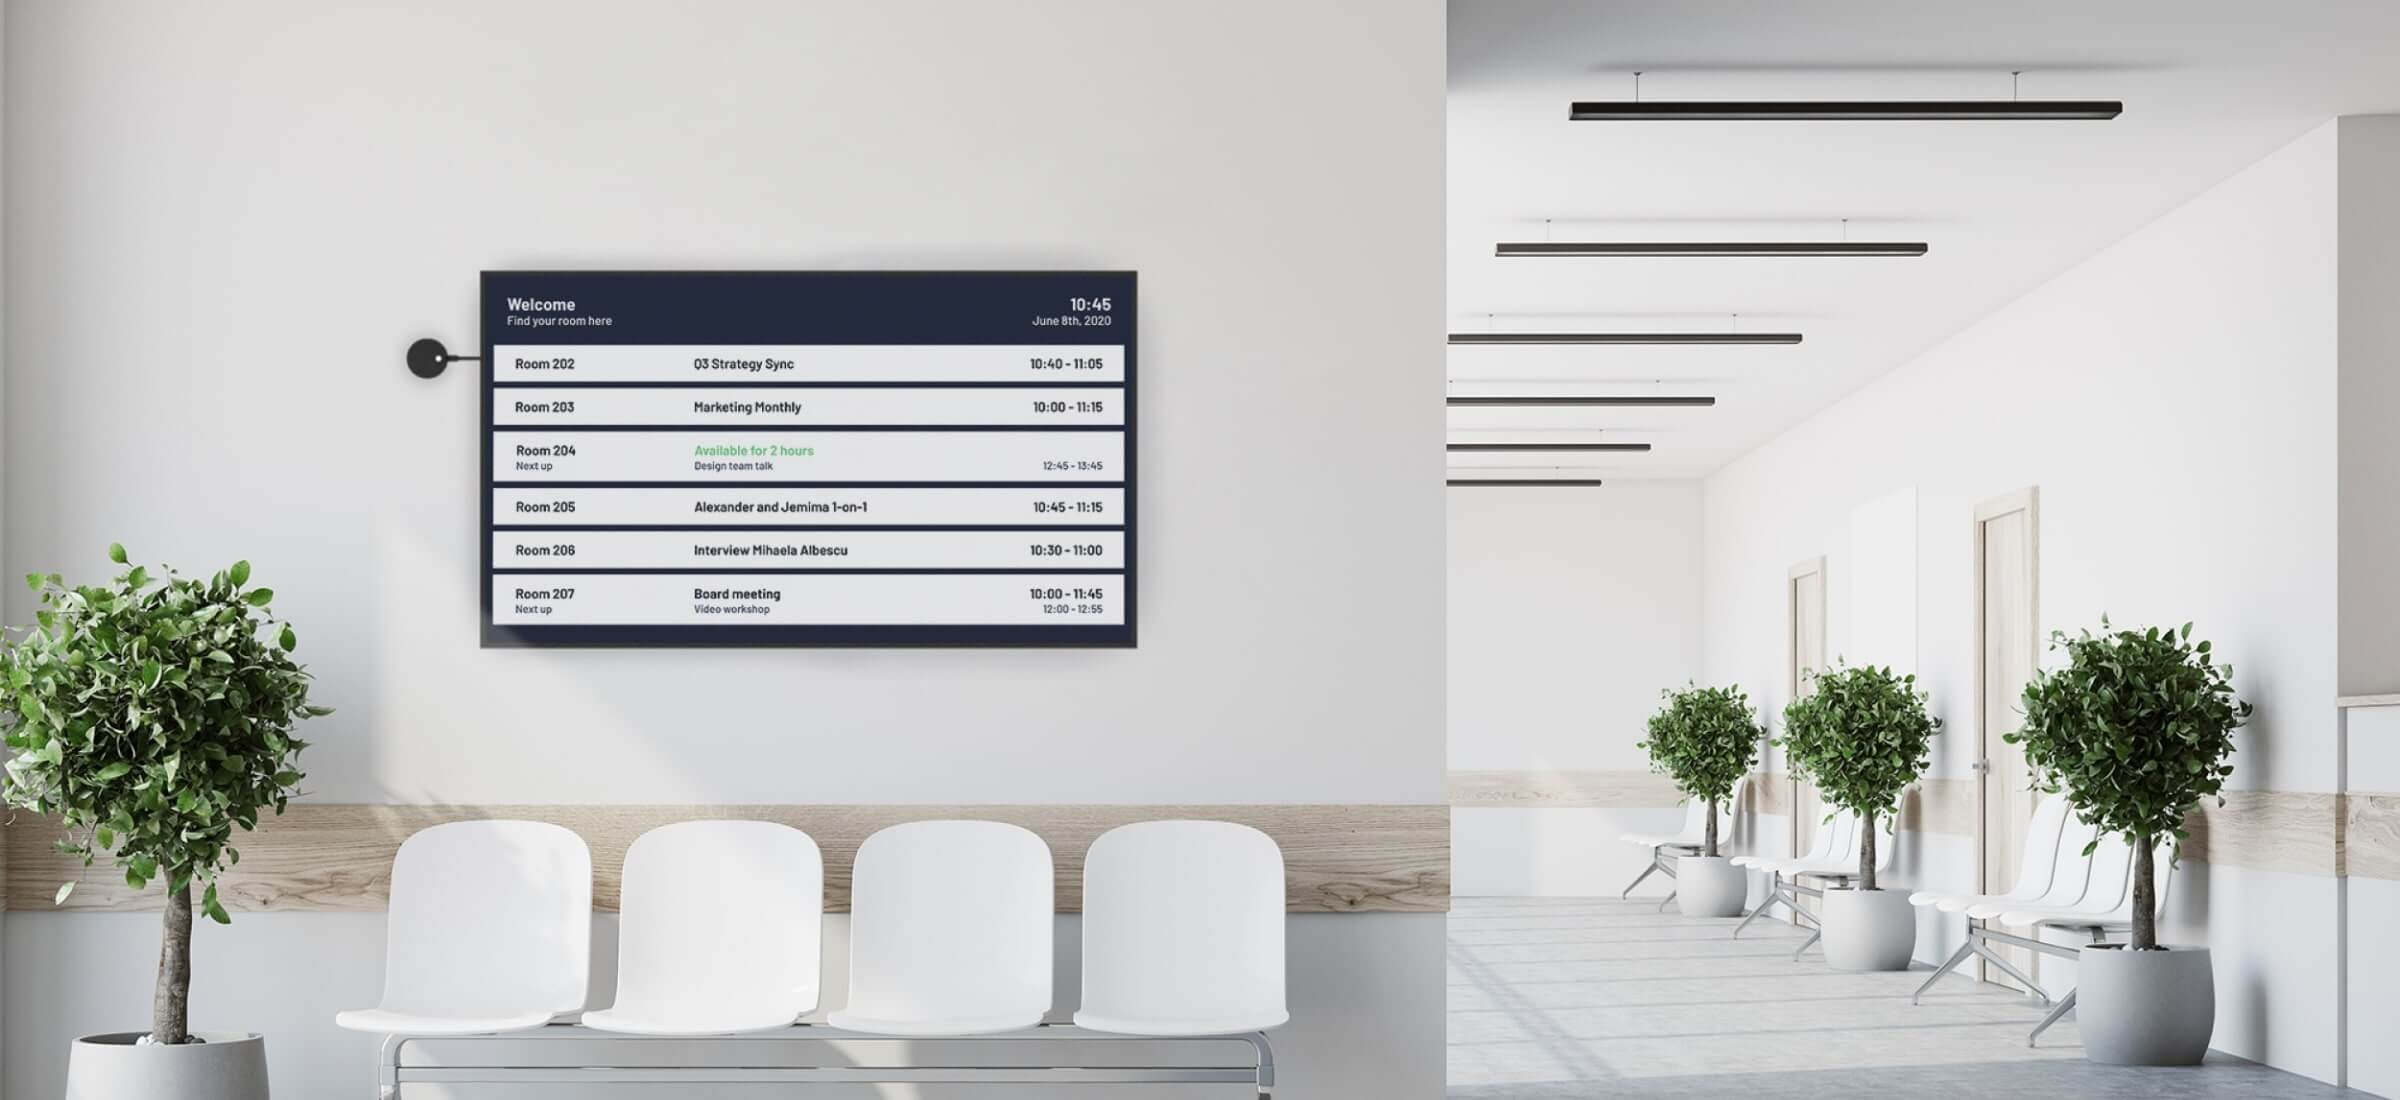 How Digital Signage can get your message across